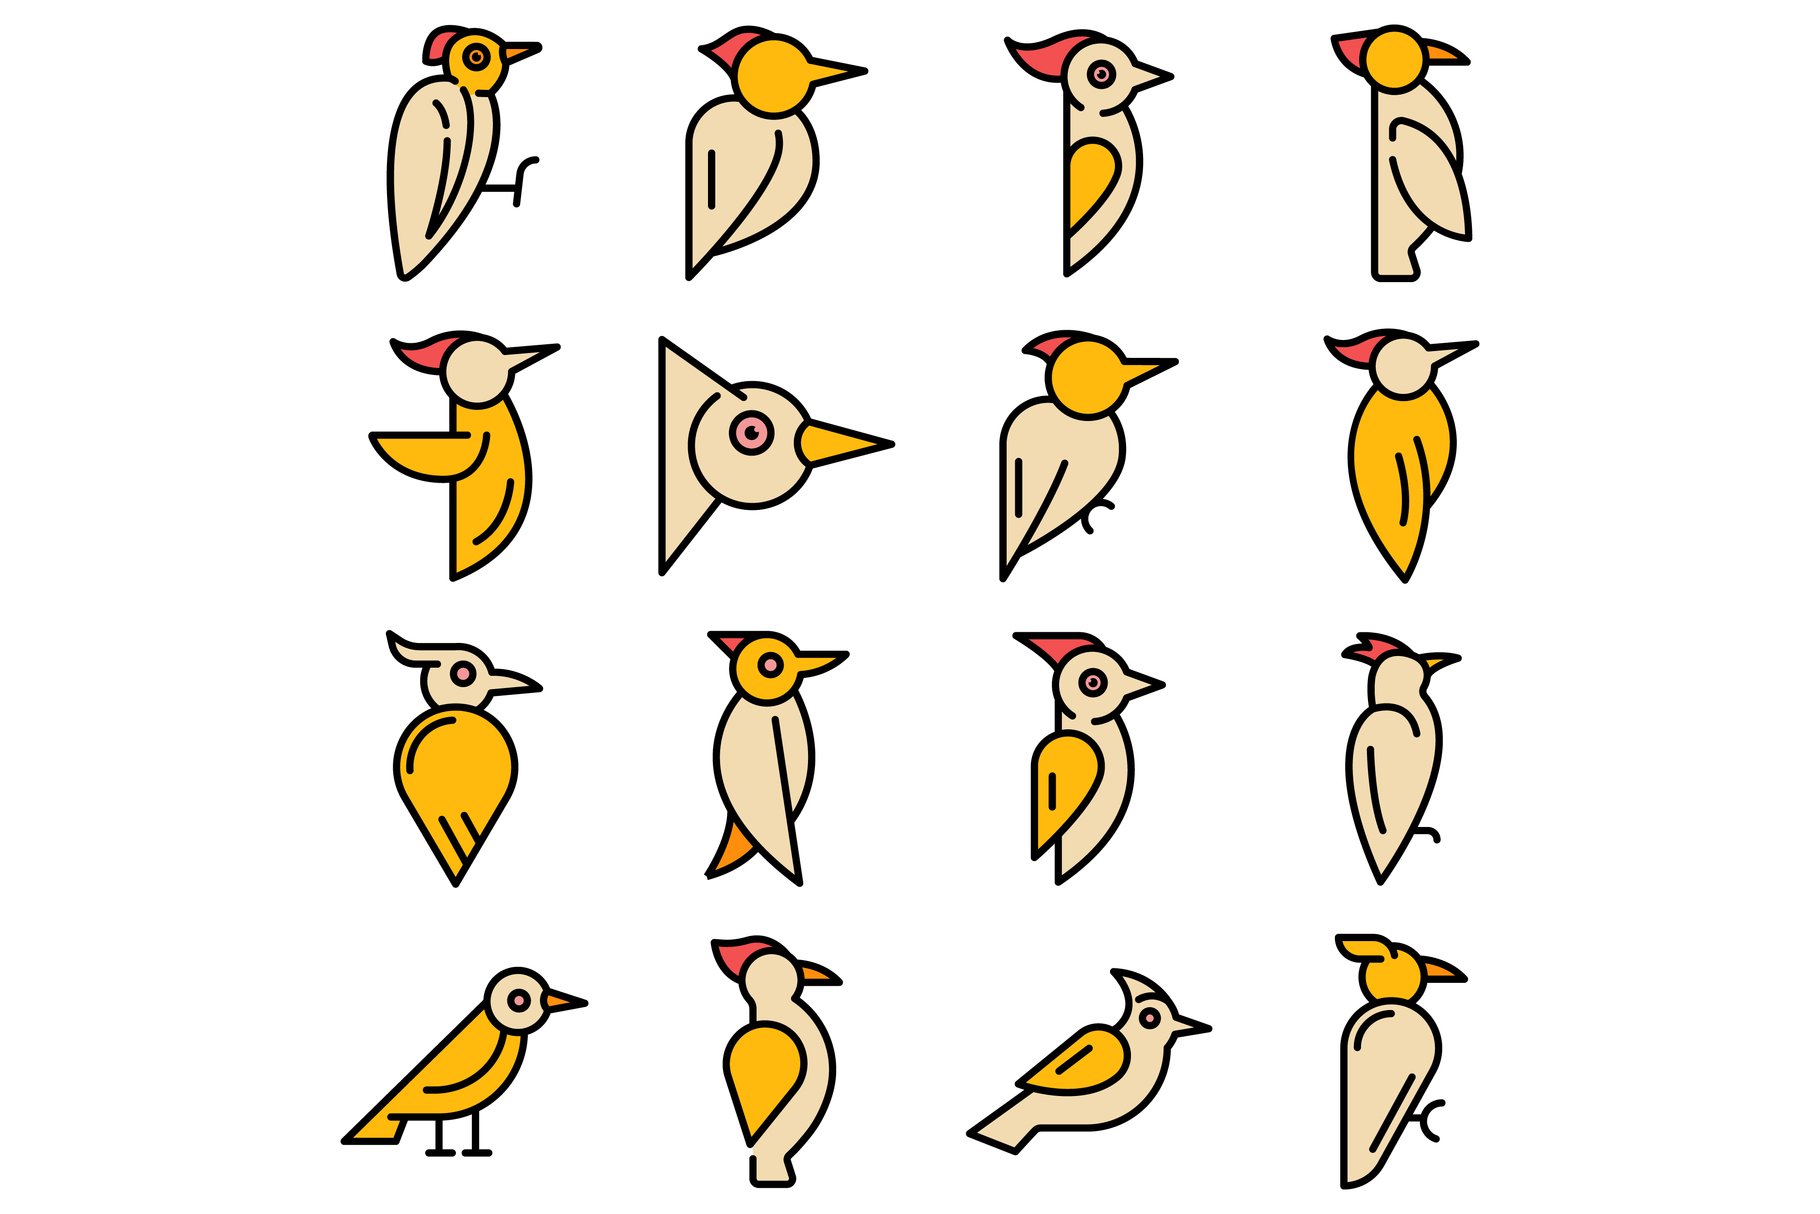 Woodpecker icons set vector flat cover image.